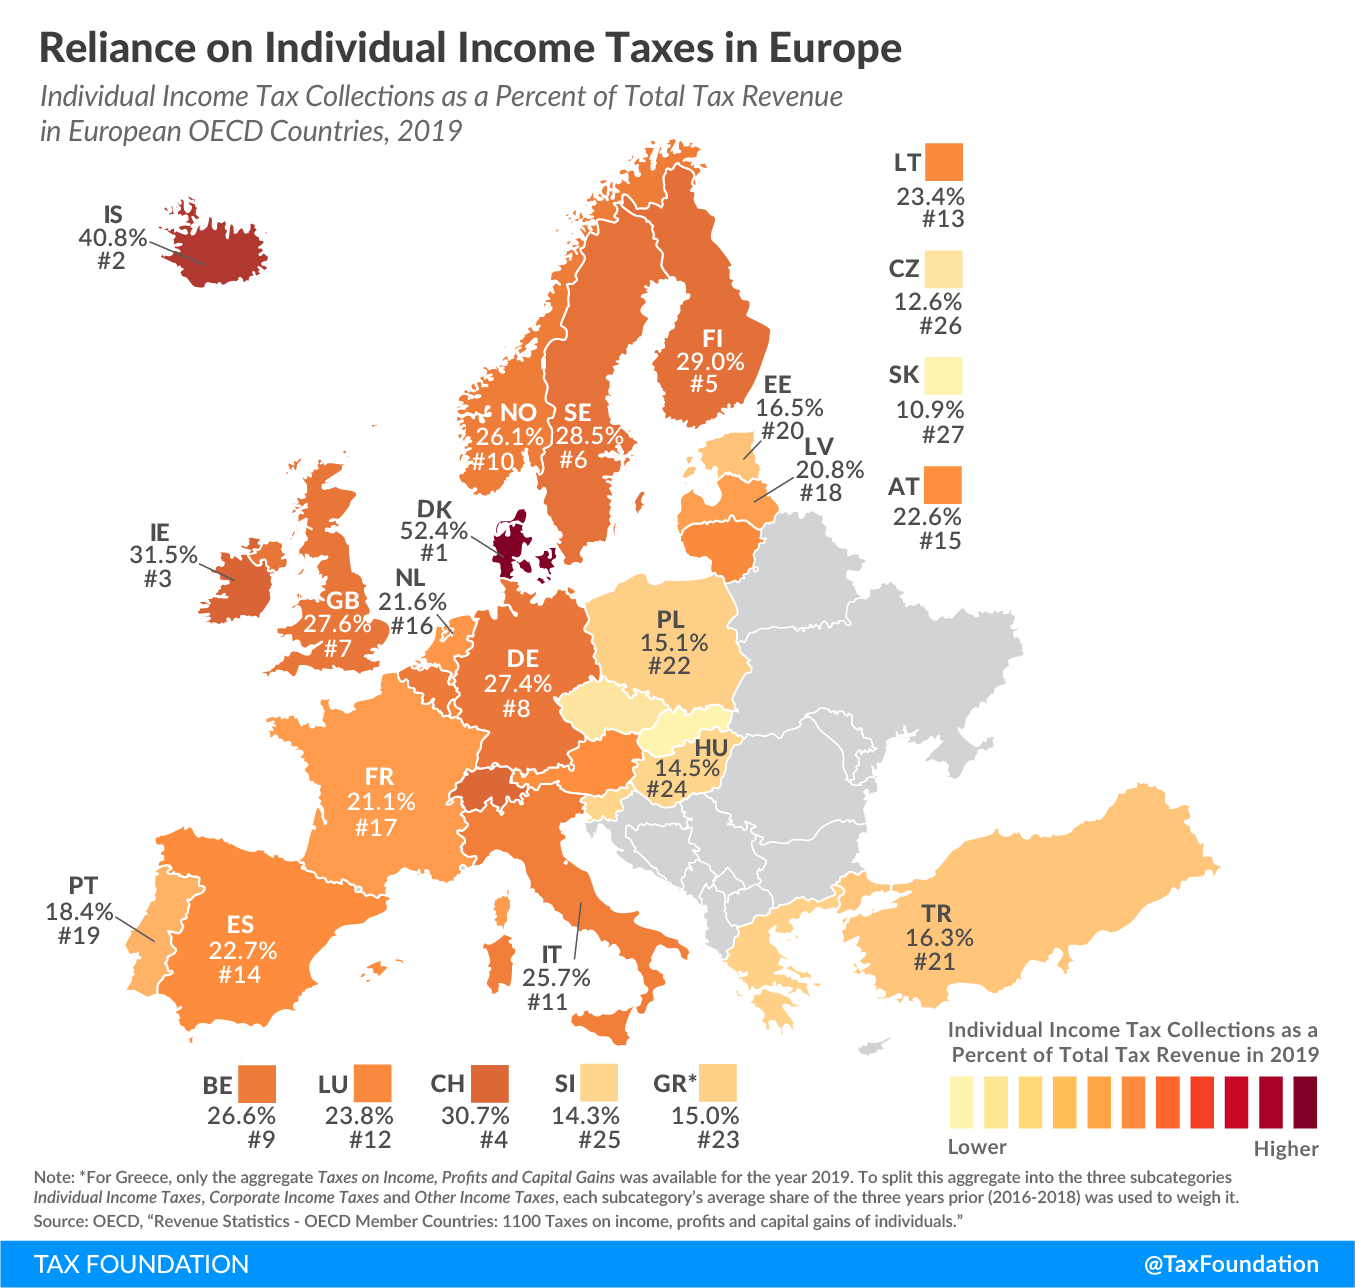 Reliance on individual income tax revenue in Europe 2019